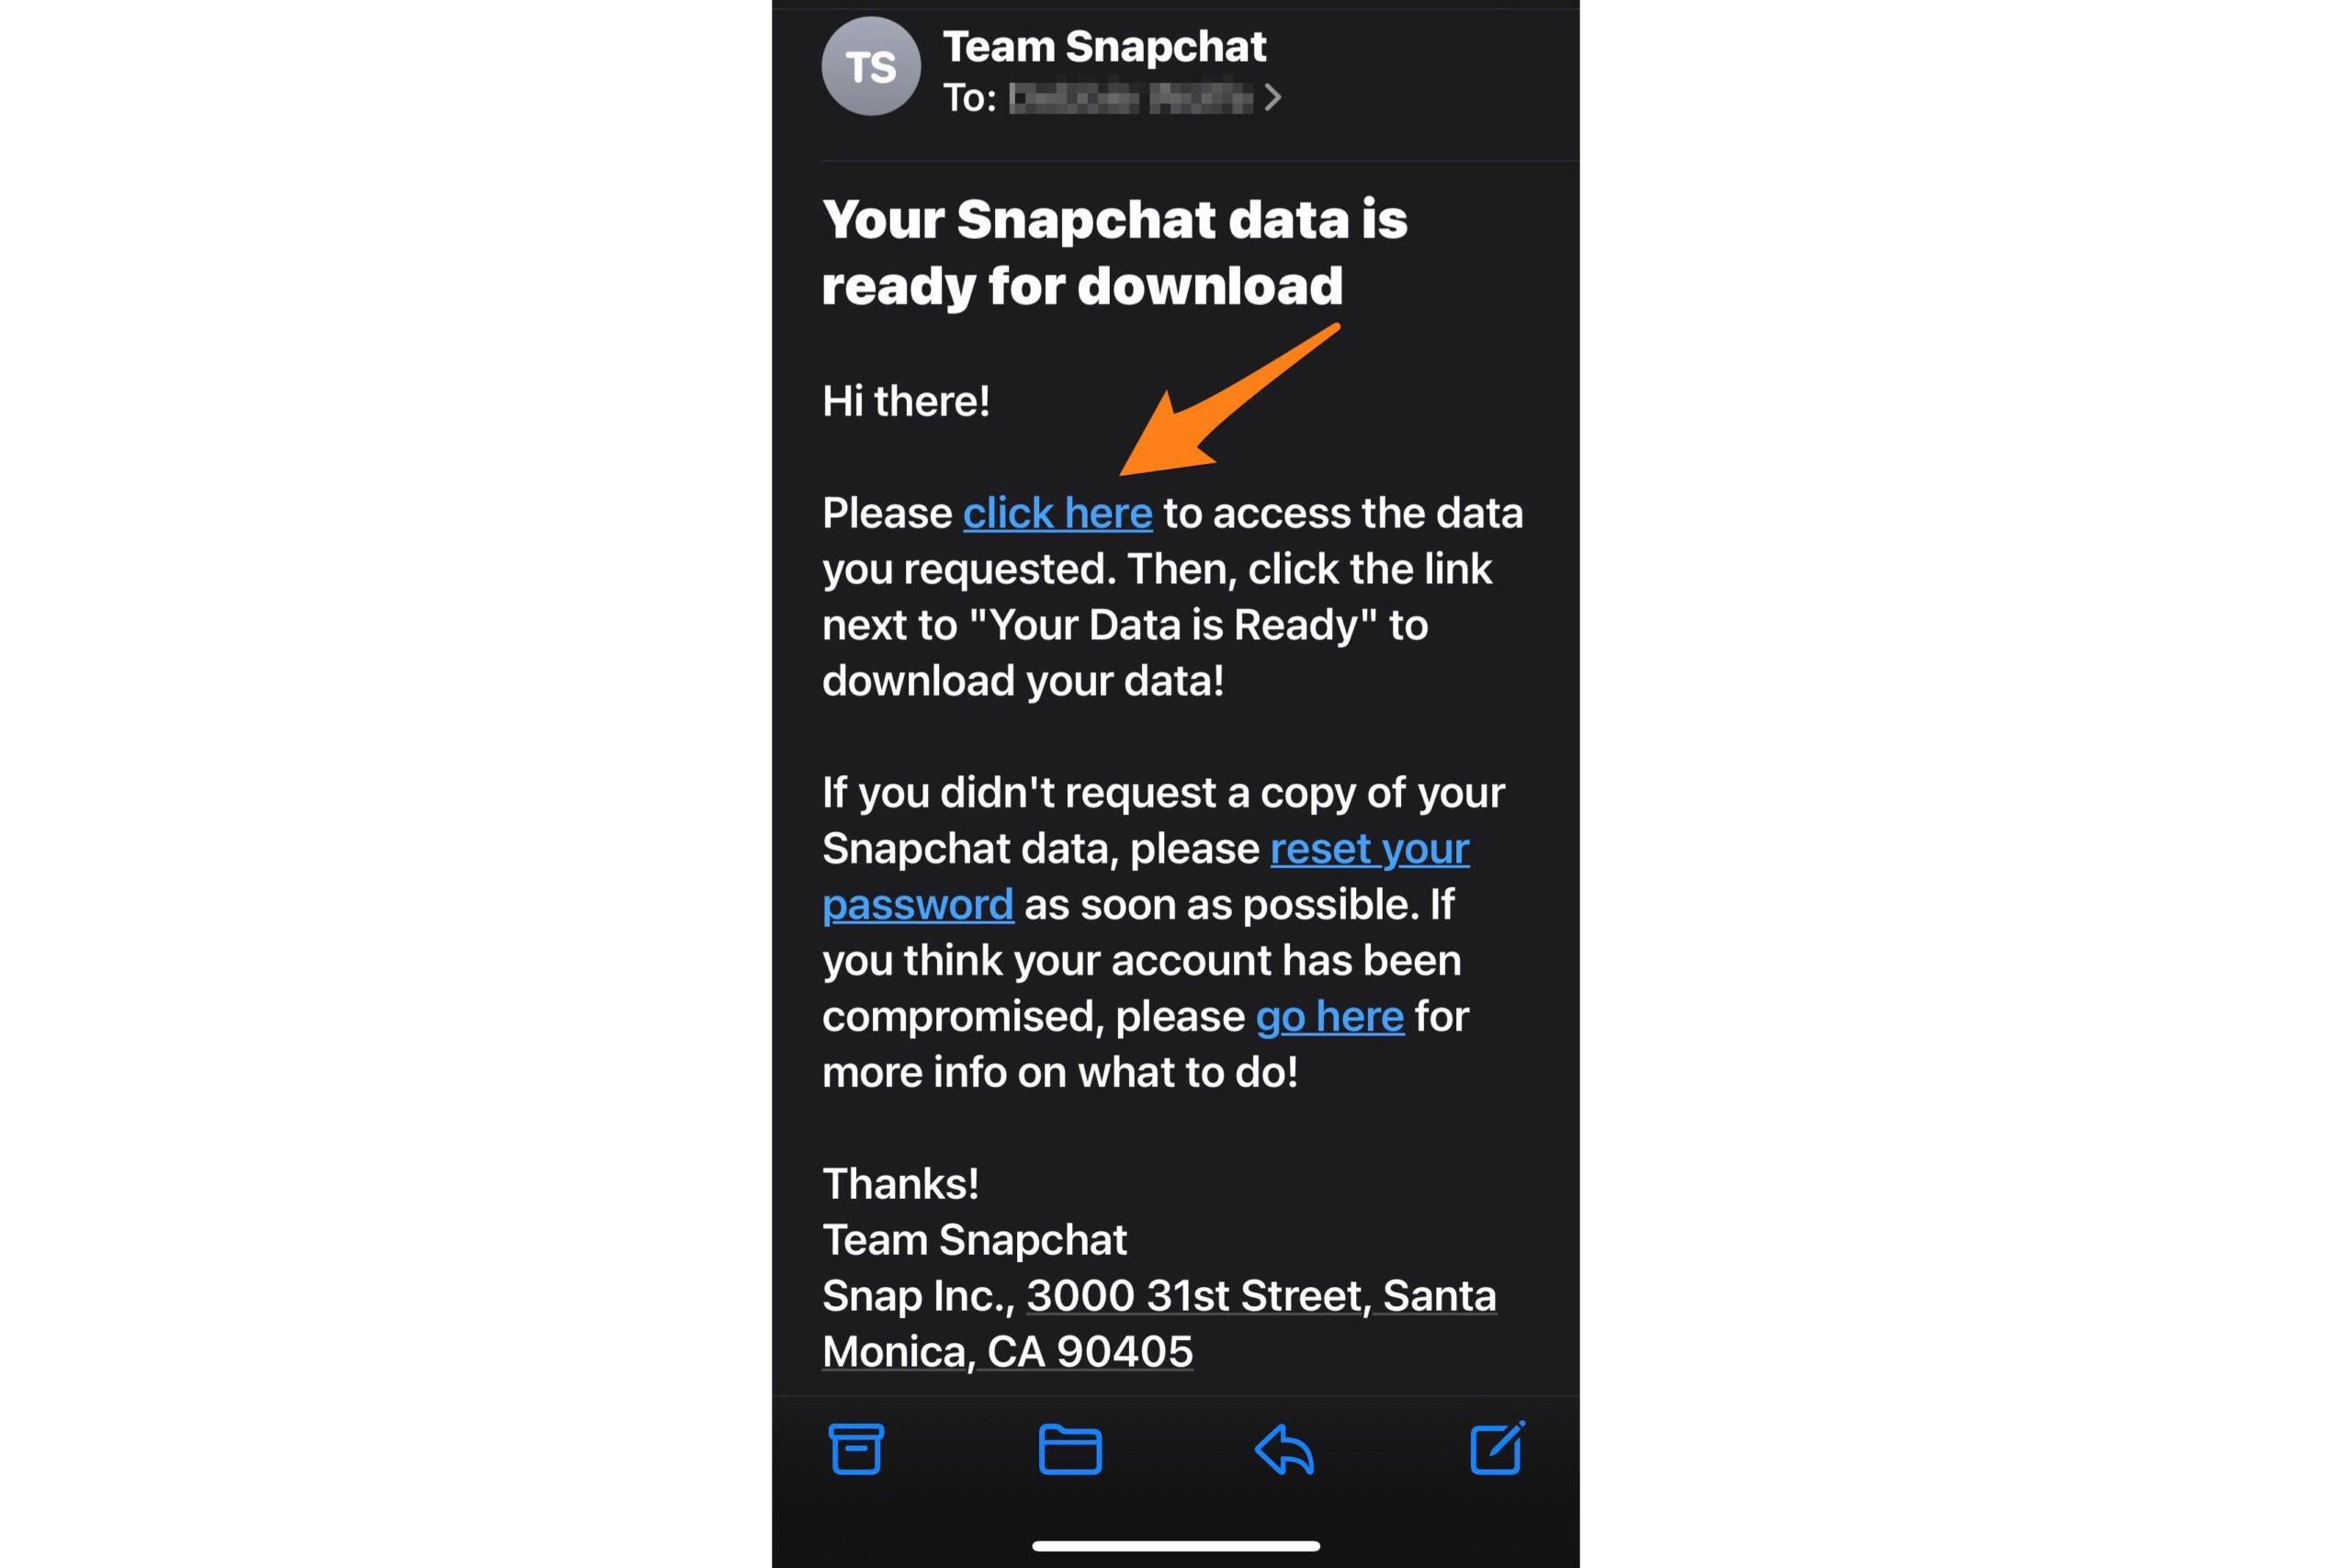 An email sent by Snapchat describing how to download your Snapchat data before deleting your Snapchat account.